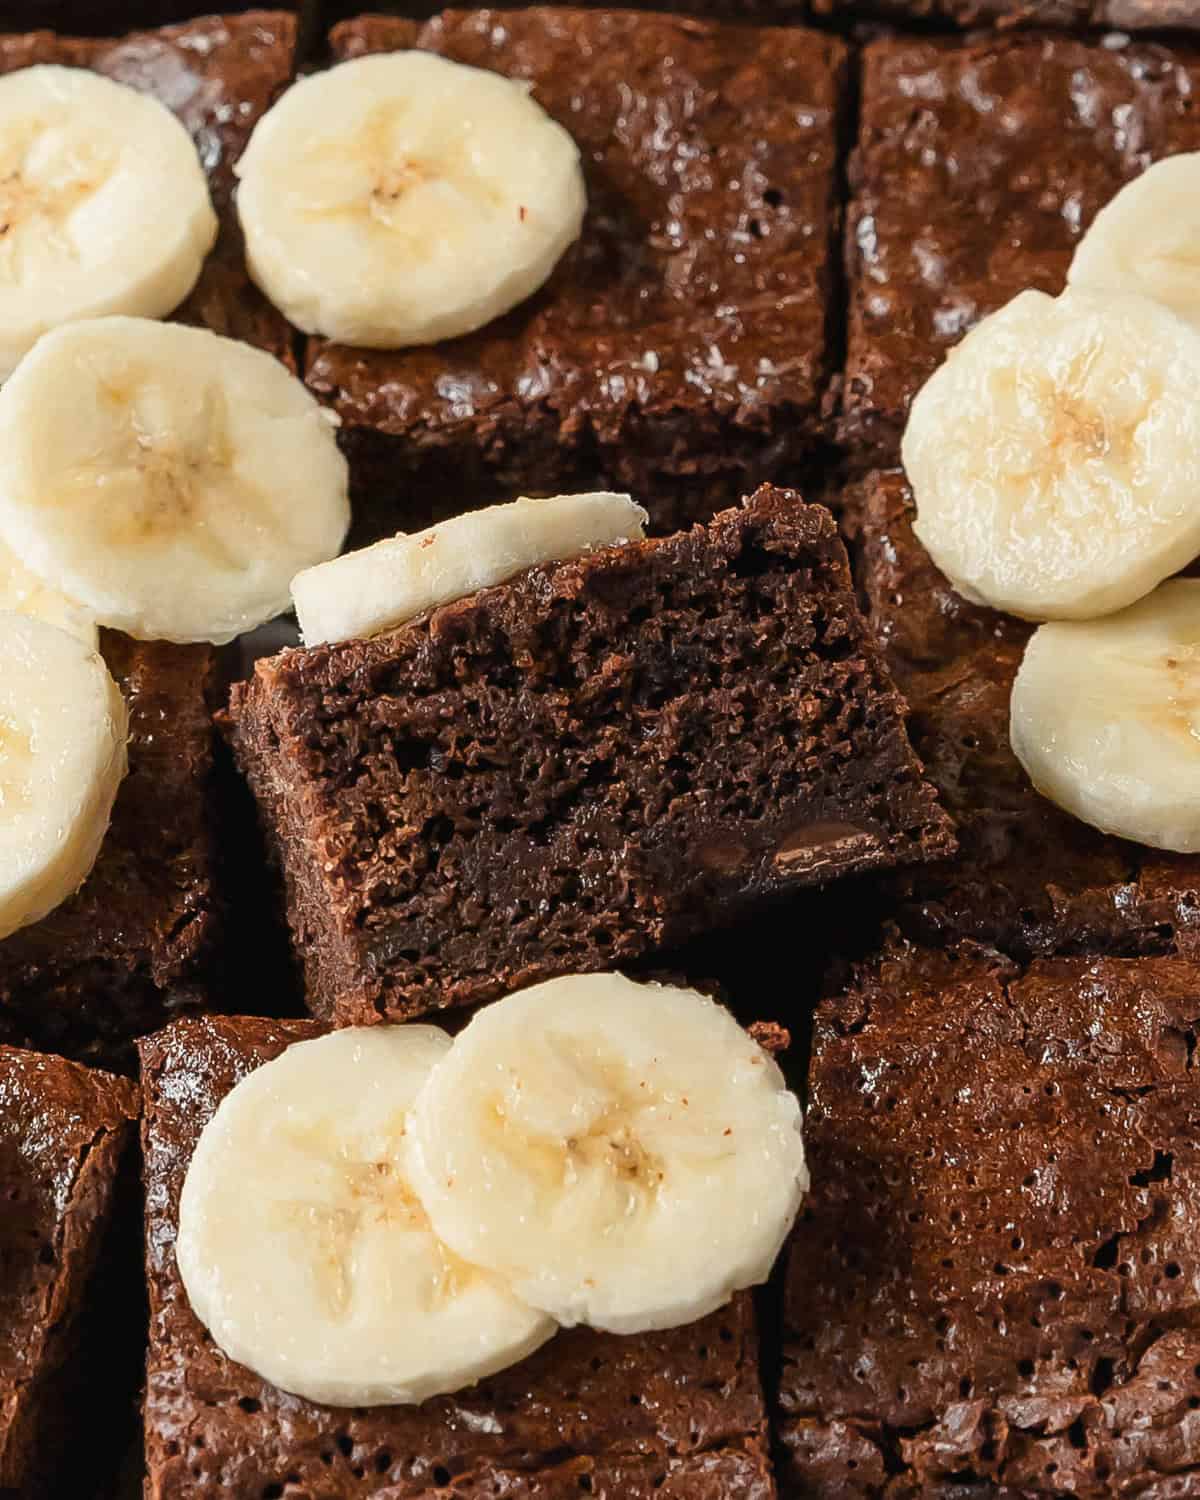 Banana brownies are rich, fudgy and chewy brownies made with creamy bananas. The indulgently deep chocolate flavor of the brownies is perfectly balanced with the subtle sweetness of ripe bananas and chocolate chips.  These banana flavored brownies are easy to make and are the perfect treat. 